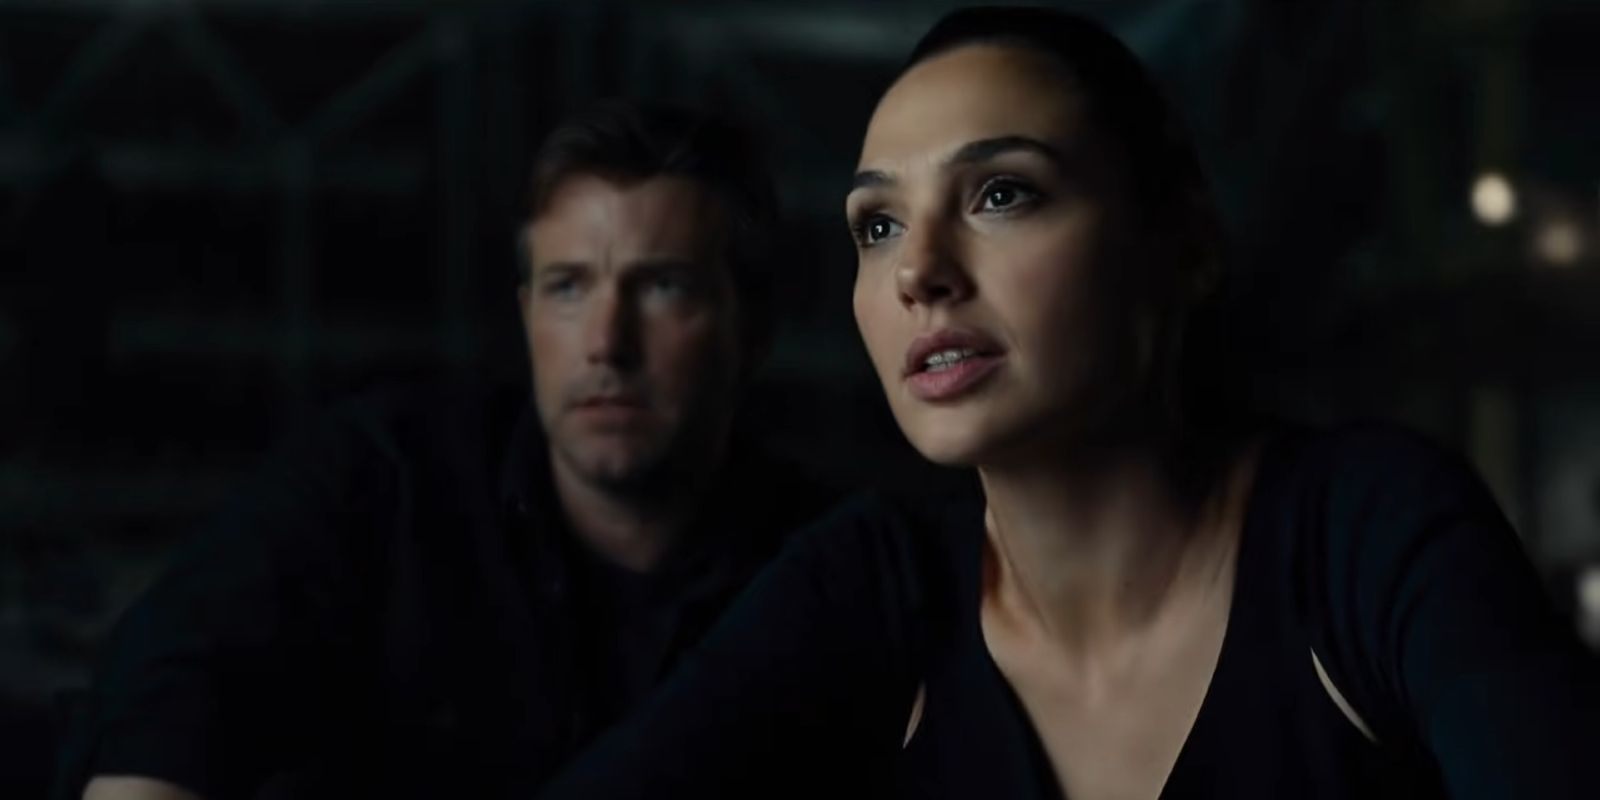 Diana Prince And Bruce Wayne In The Batcave - Zack Snyder's Justice League